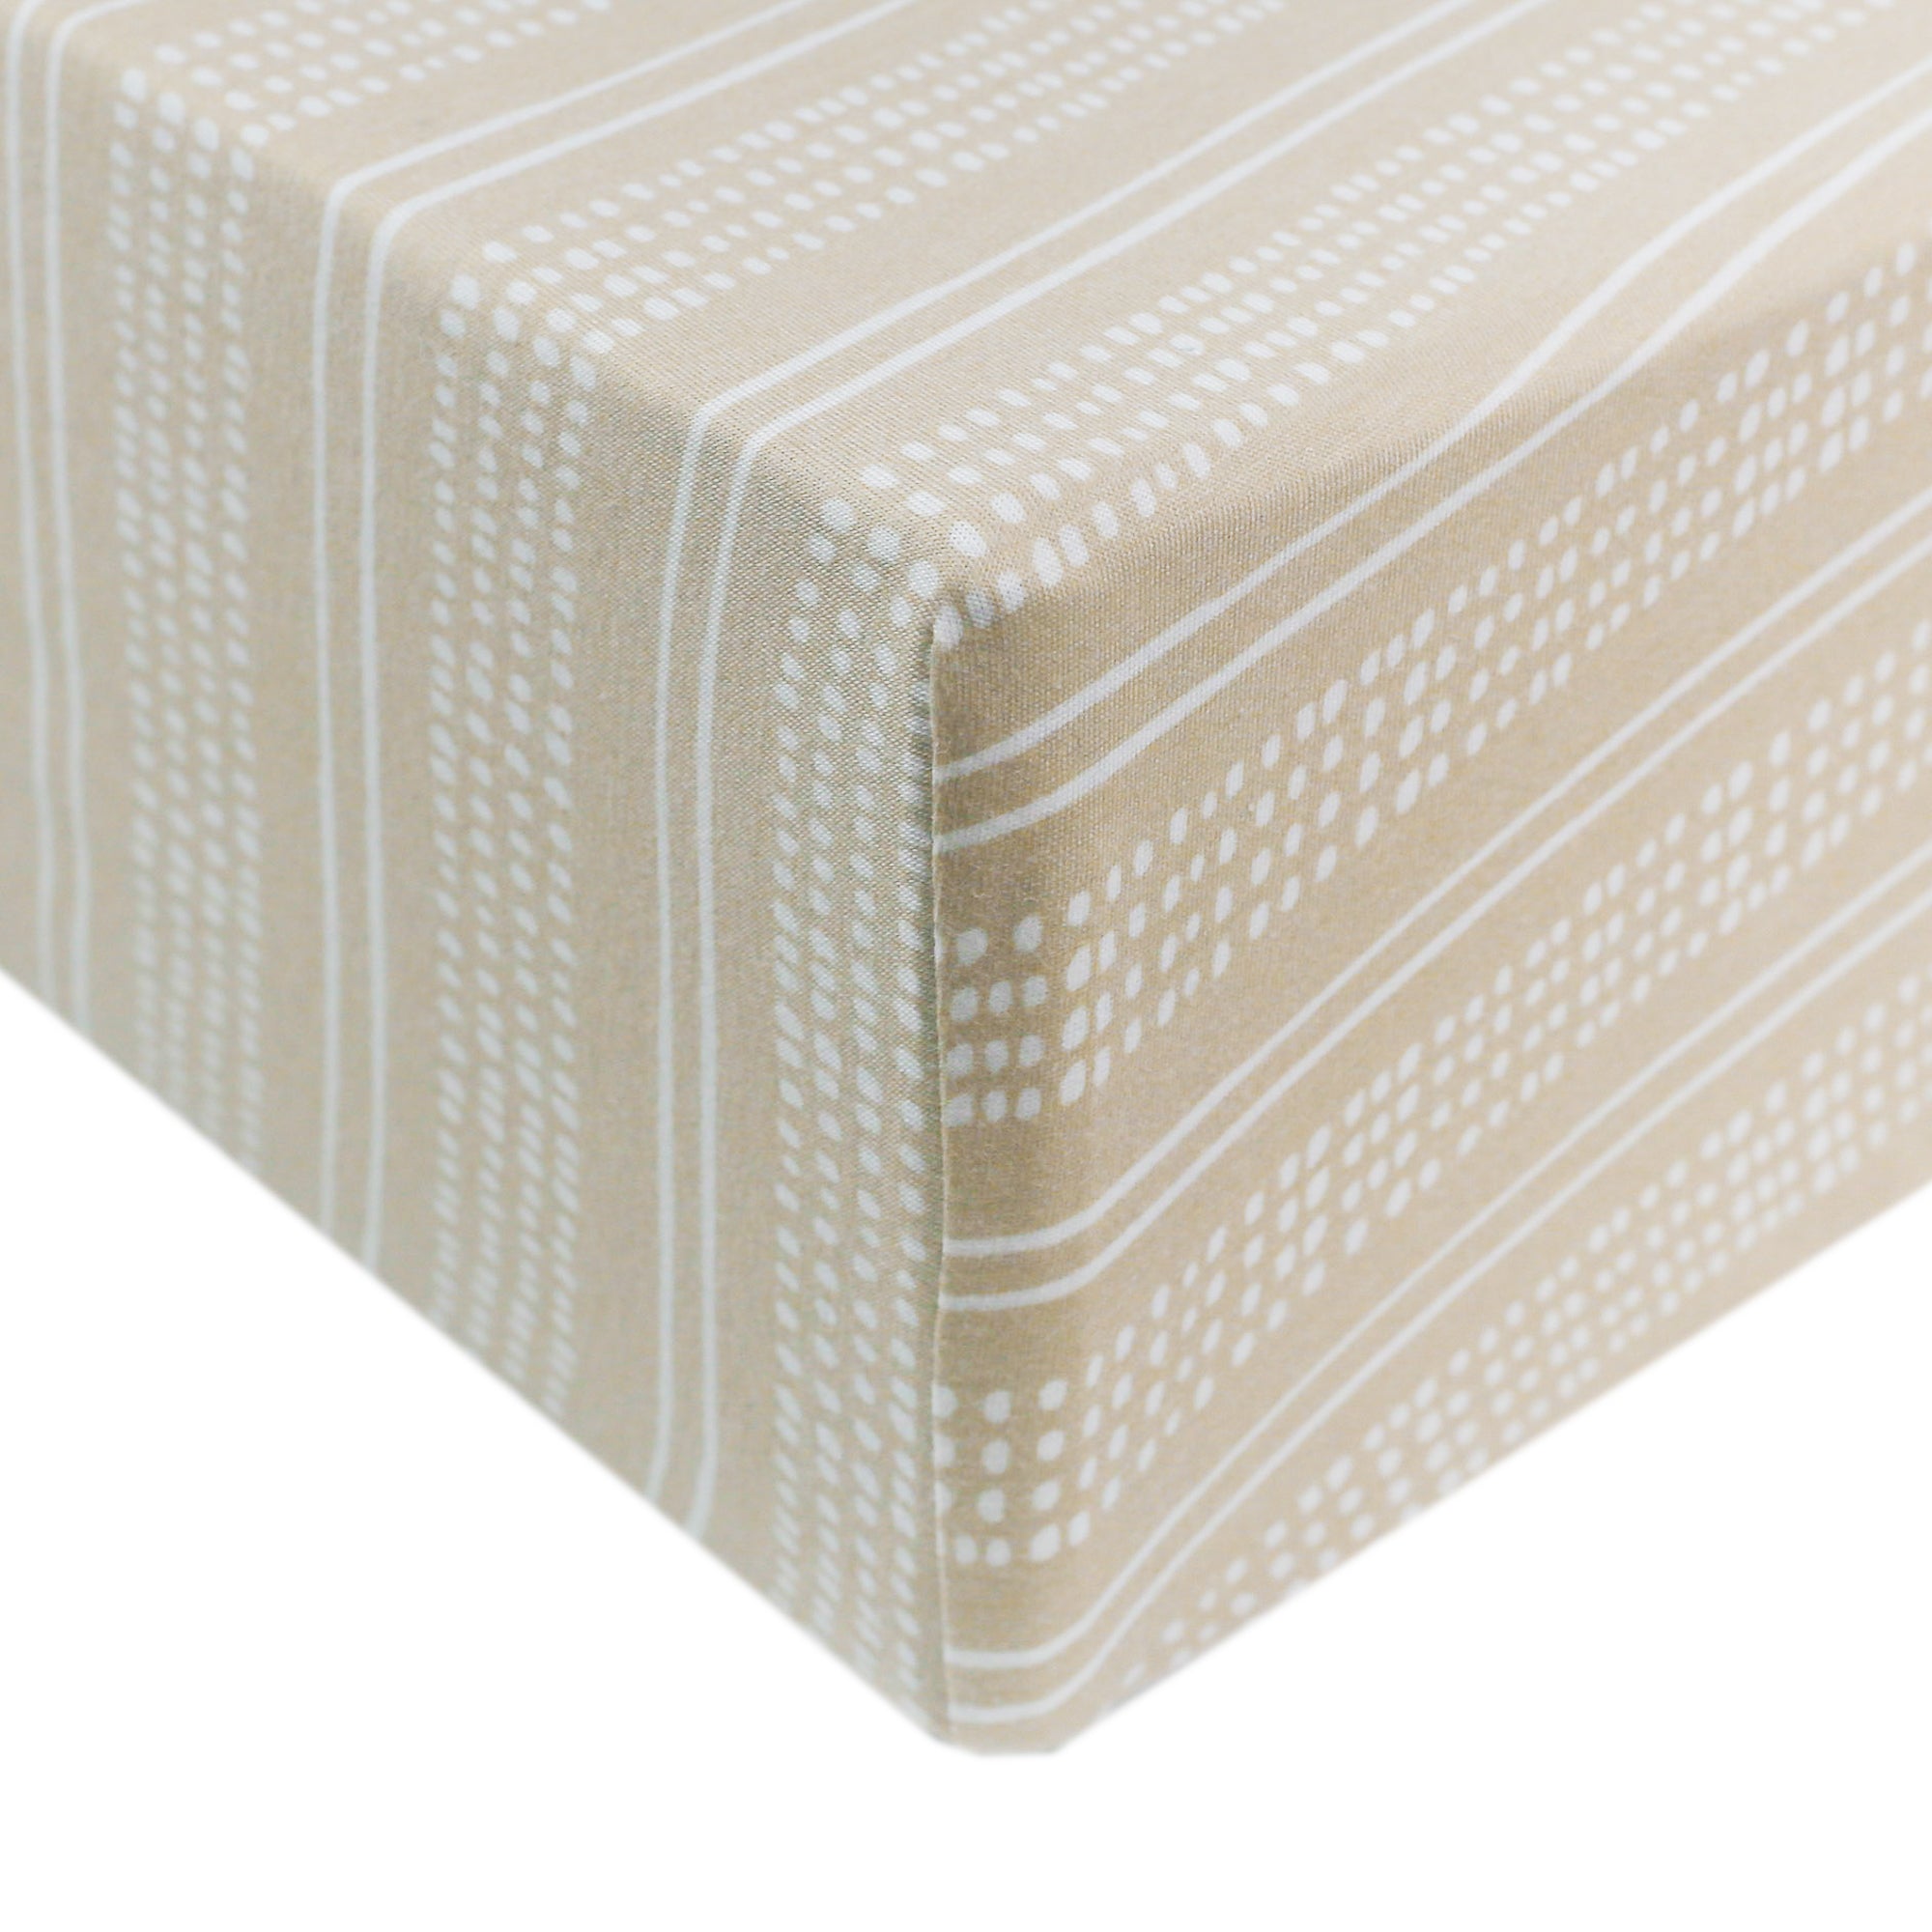 Premium Knit Fitted Crib Sheet - Clay